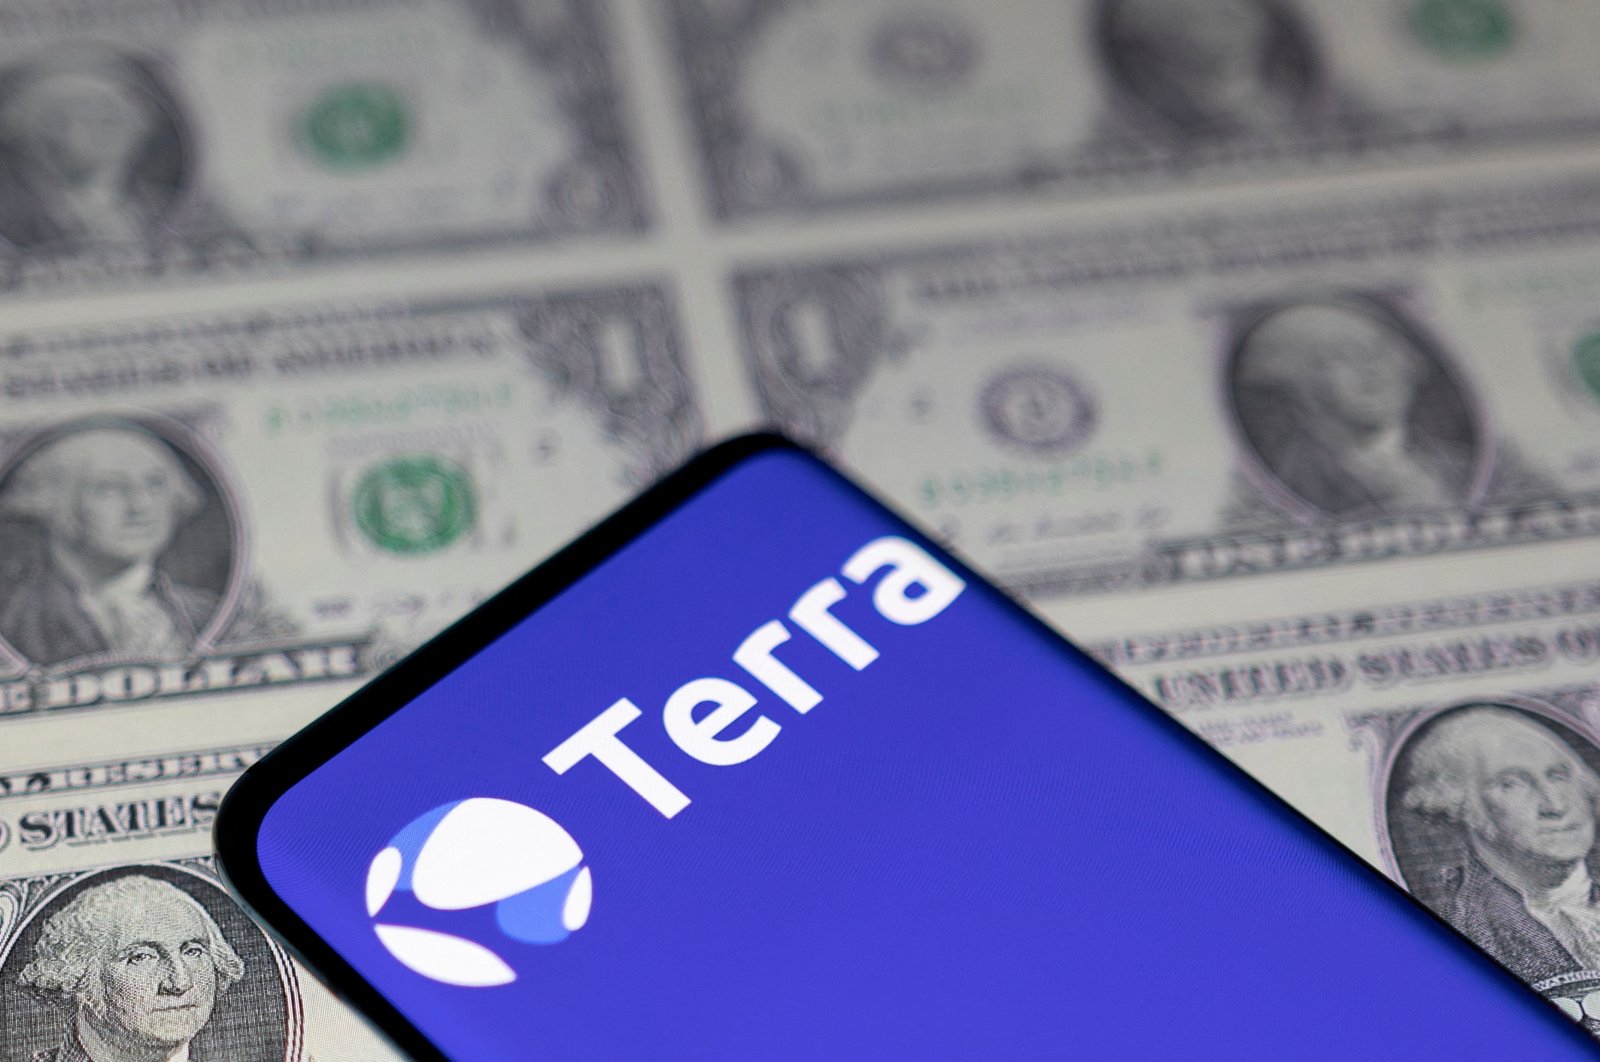 A smartphone with the Terra logo is placed on displayed U.S. dollars in this illustration taken May 11, 2022. (Reuters Photo)